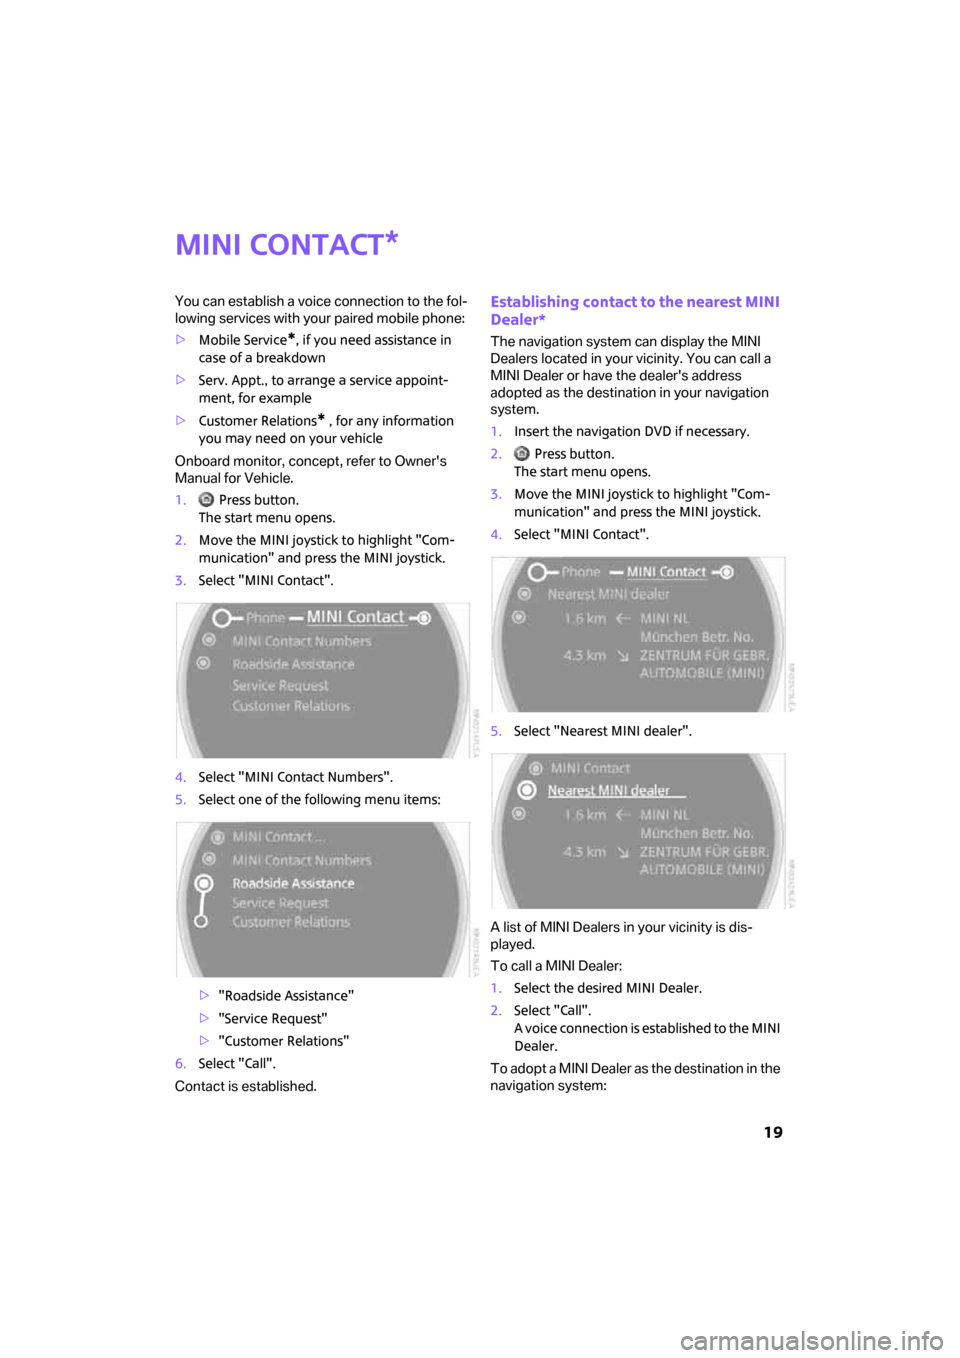 MINI Clubman 2008   (Mini Connected) Owners Guide  19
MINI contact
You can establish a voice connection to the fol-
lowing services with your paired mobile phone:
>Mobile Service
*, if you need assistance in 
case of a breakdown
>Serv. Appt., to arra